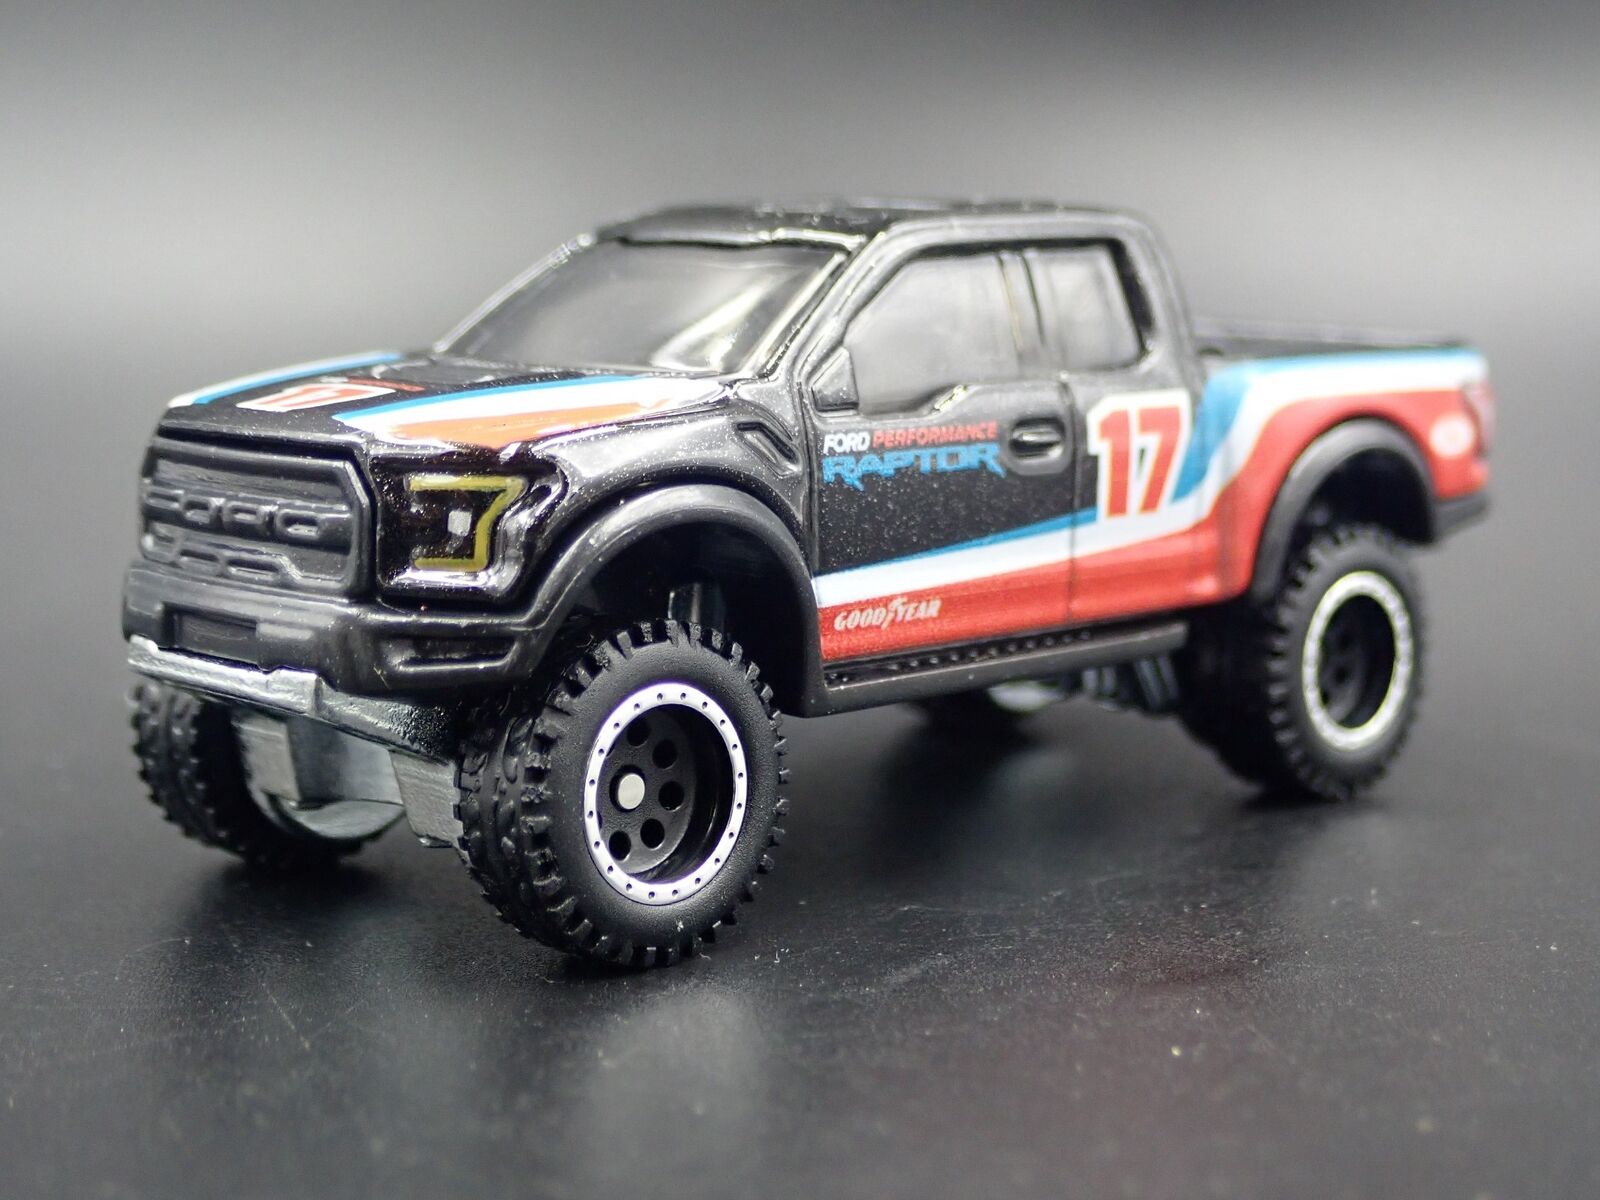 2017 - 2020 FORD F150 RAPTOR PICKUP TRUCK 1:64 SCALE DIORAMA DIECAST relisted